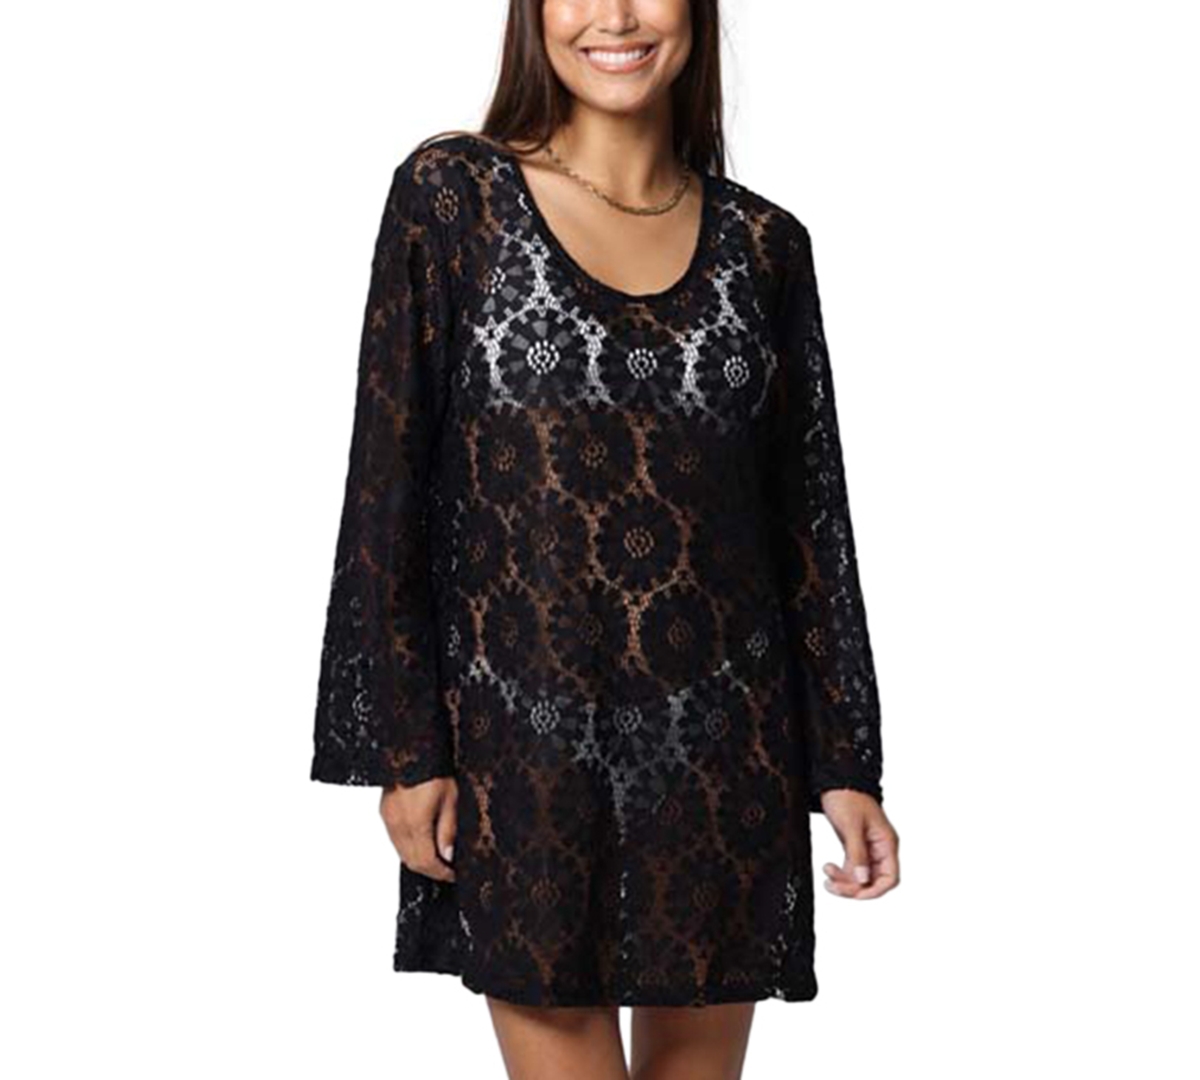 Women's Lace Long-Sleeve Cover-Up Dress - Black